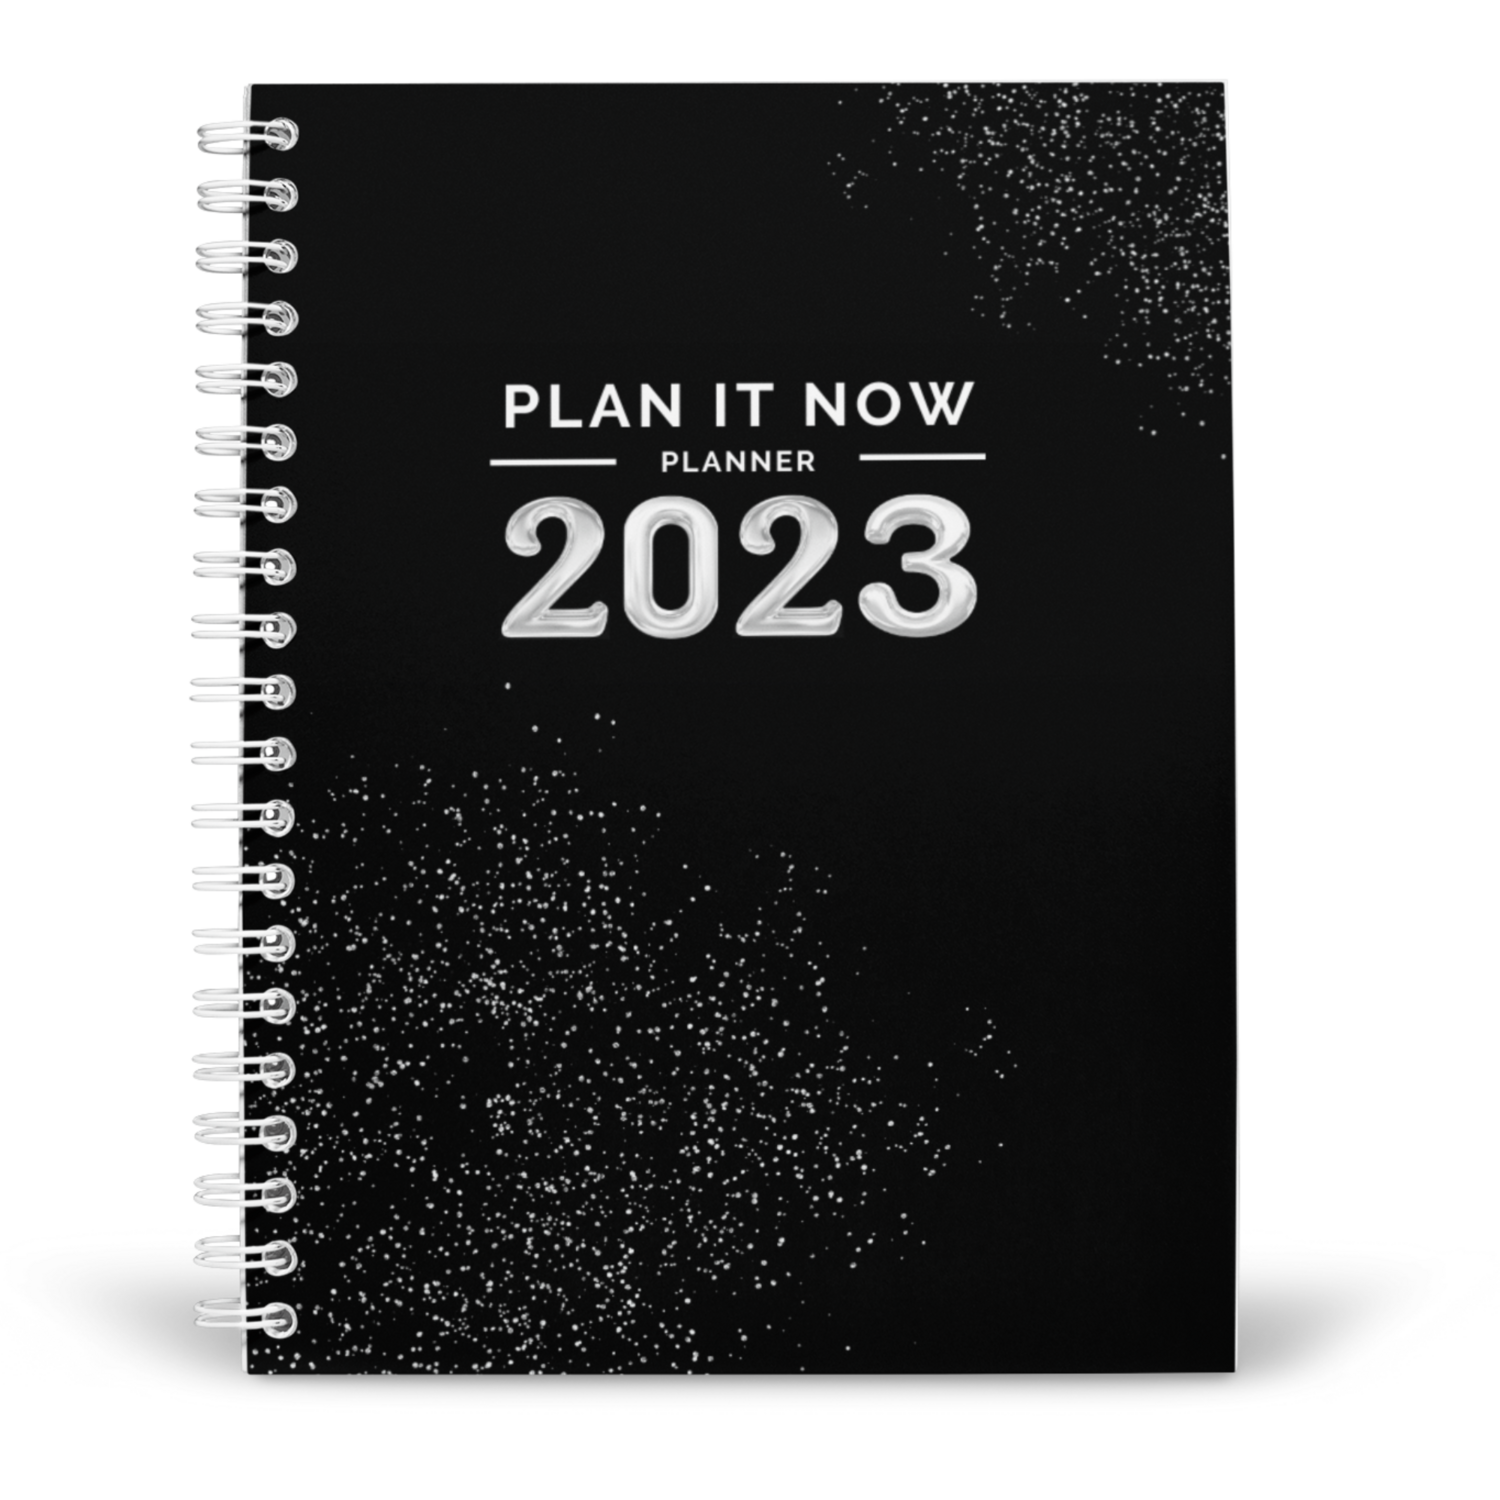 PRE-ORDER - 2023 PLAN IT NOW BUSINESS PLANNER - PRINTED VERSION